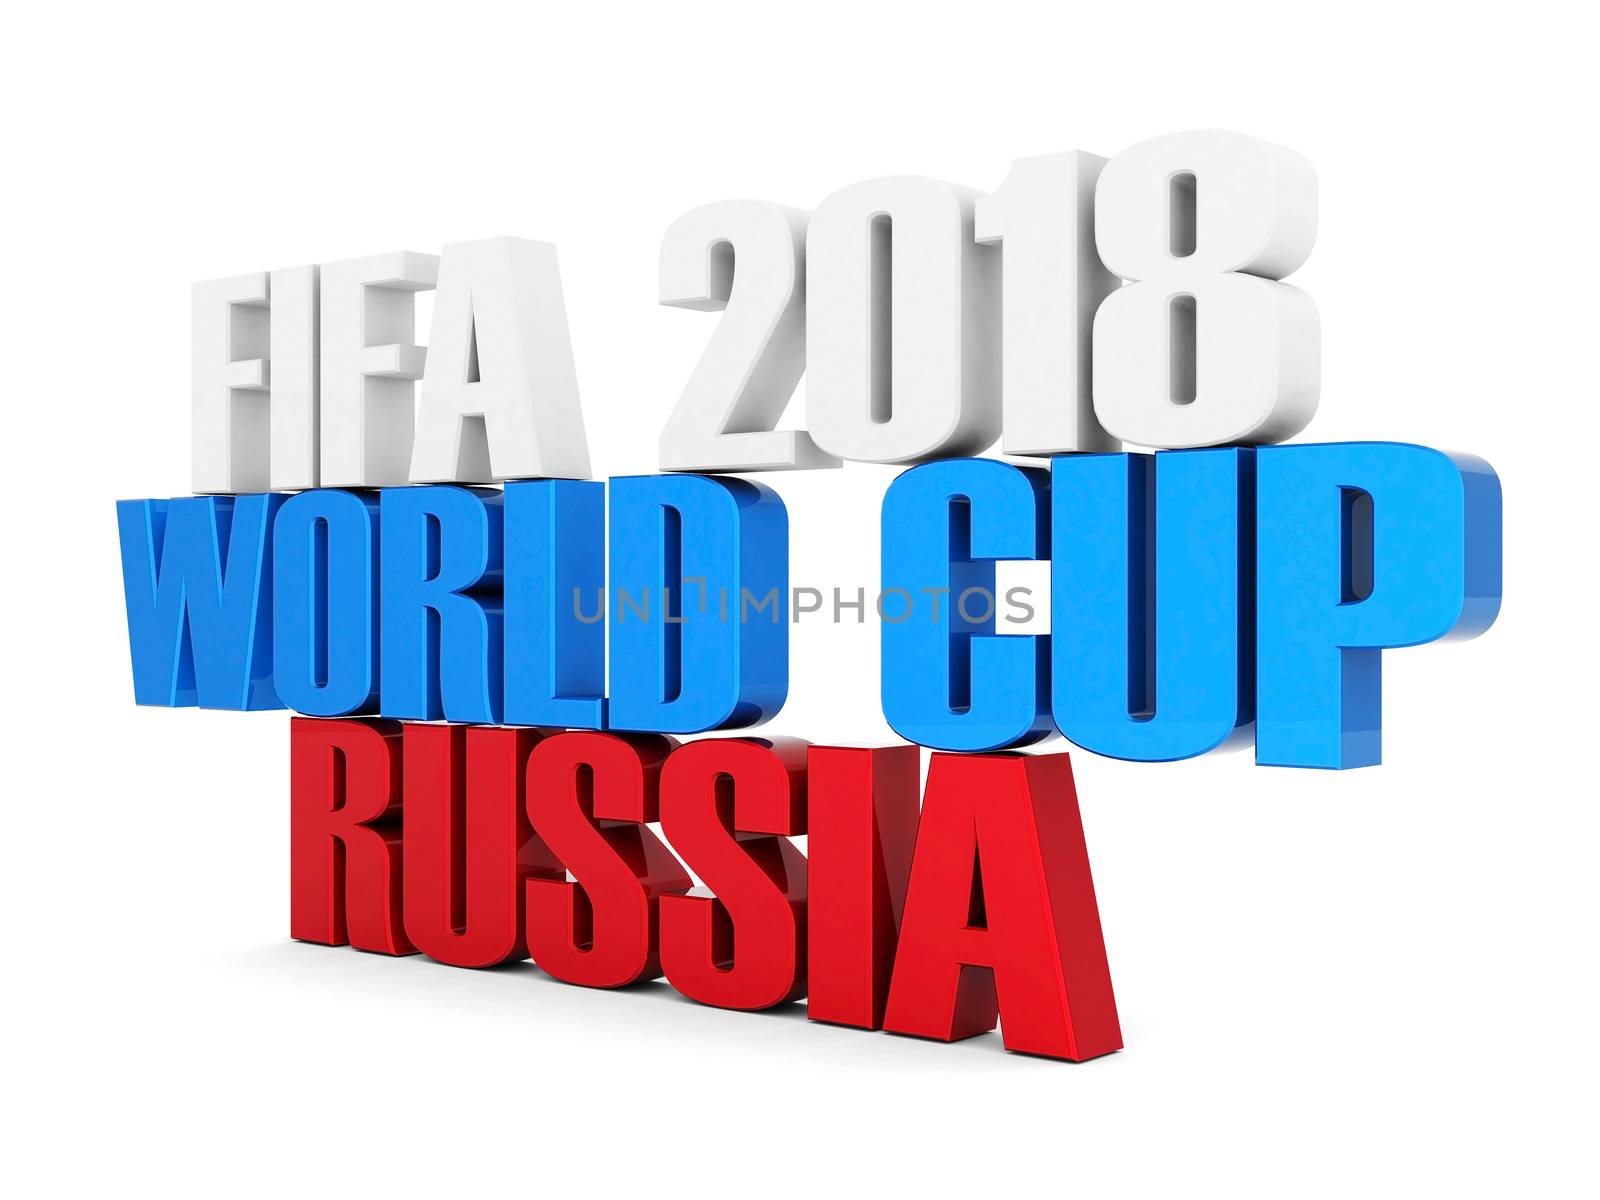 fifa world cup 2018 in Russia by mrgarry